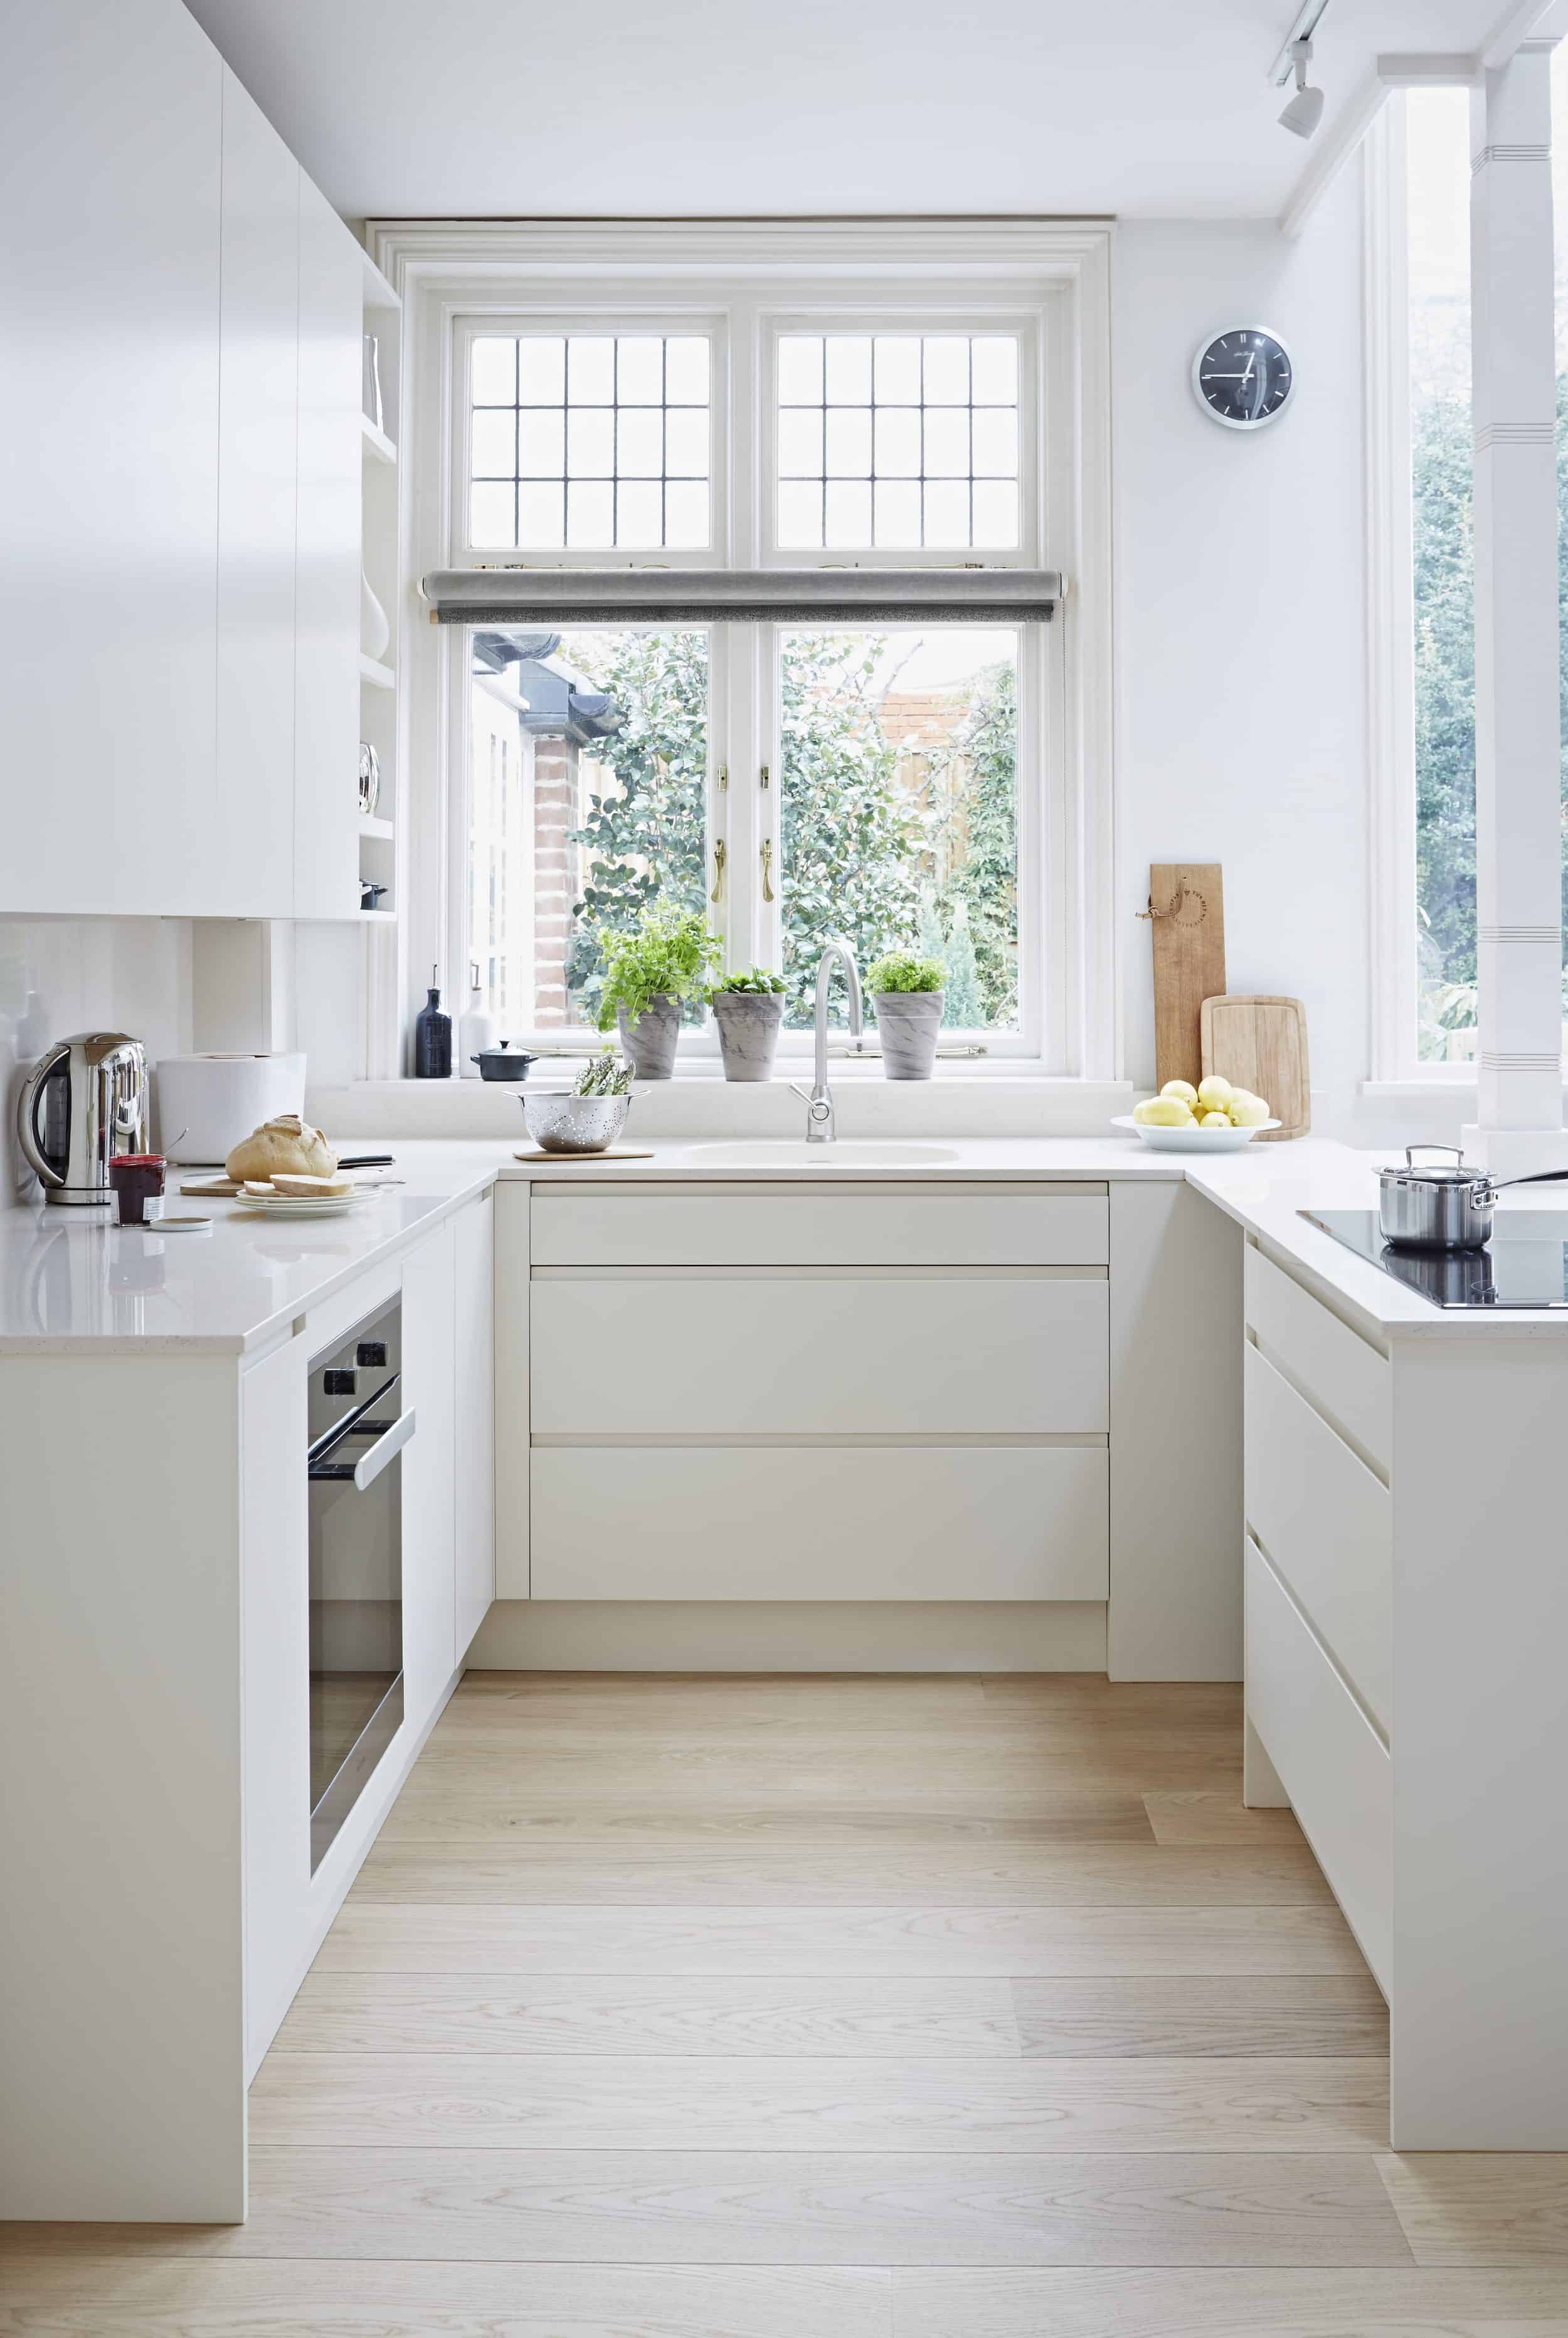 25 Simple Ways to Make Your Small Kitchen Feel Larger